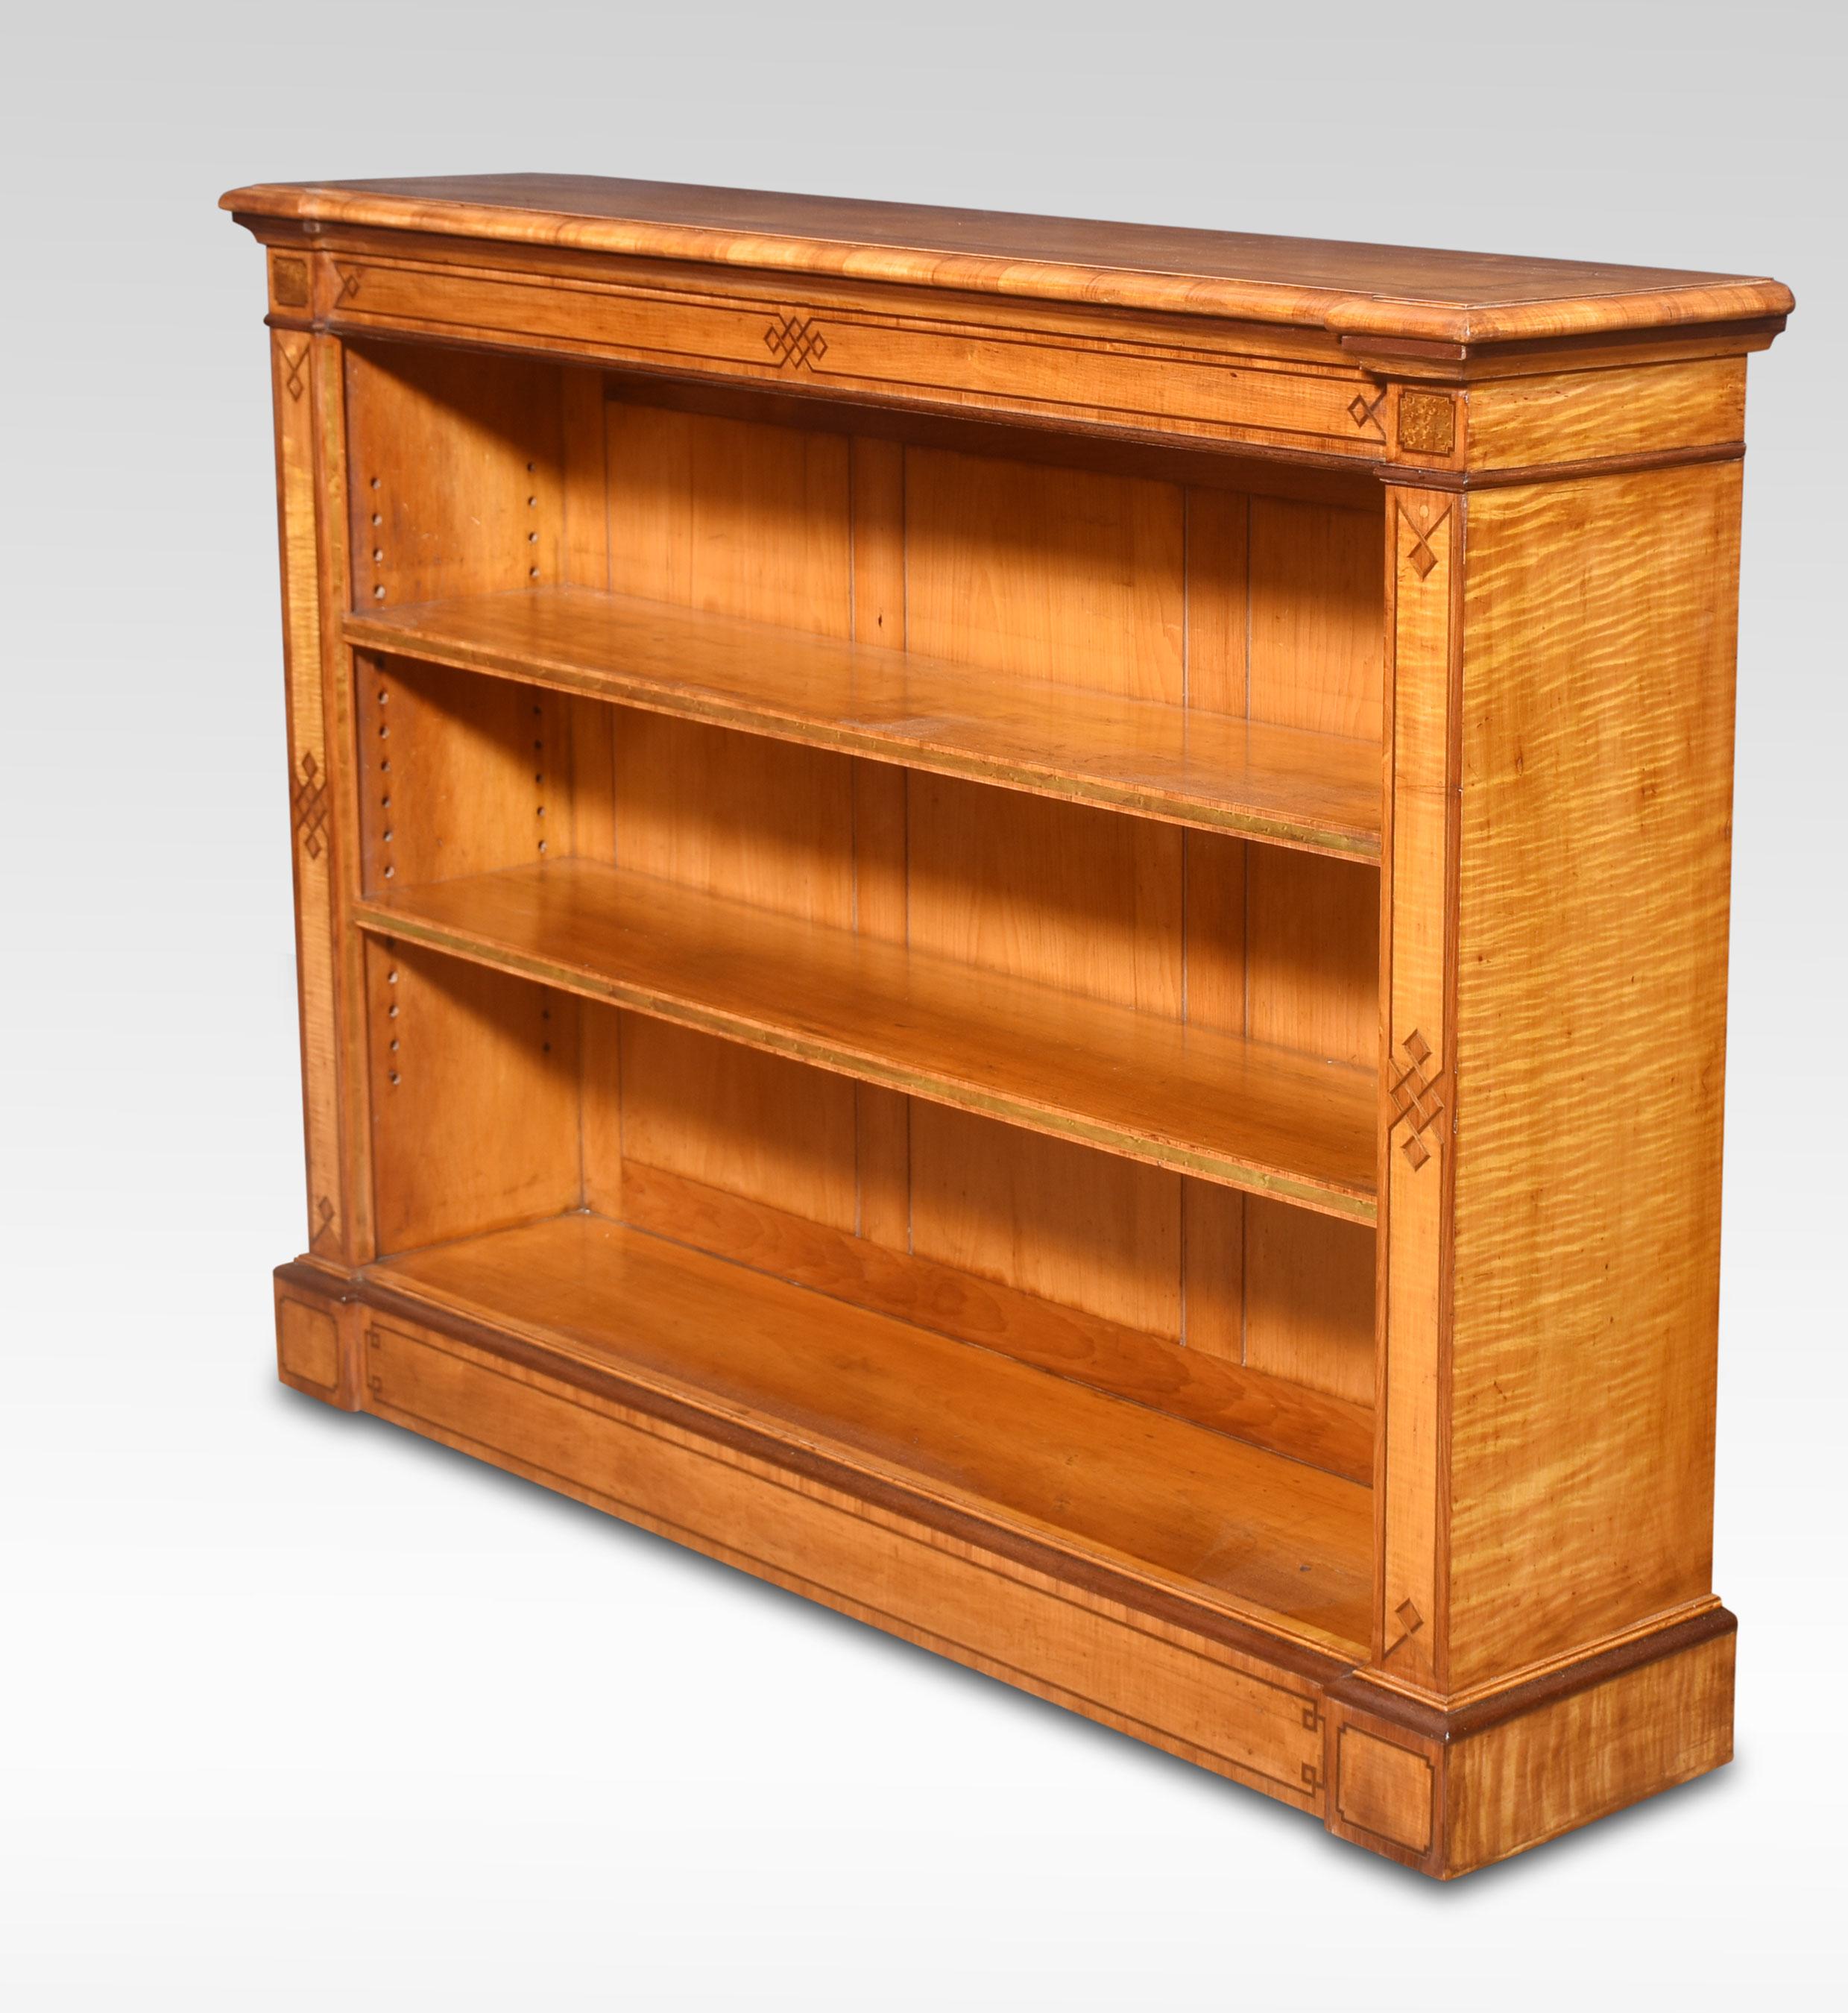 British Satinwood open bookcase By C Hindley and Sons